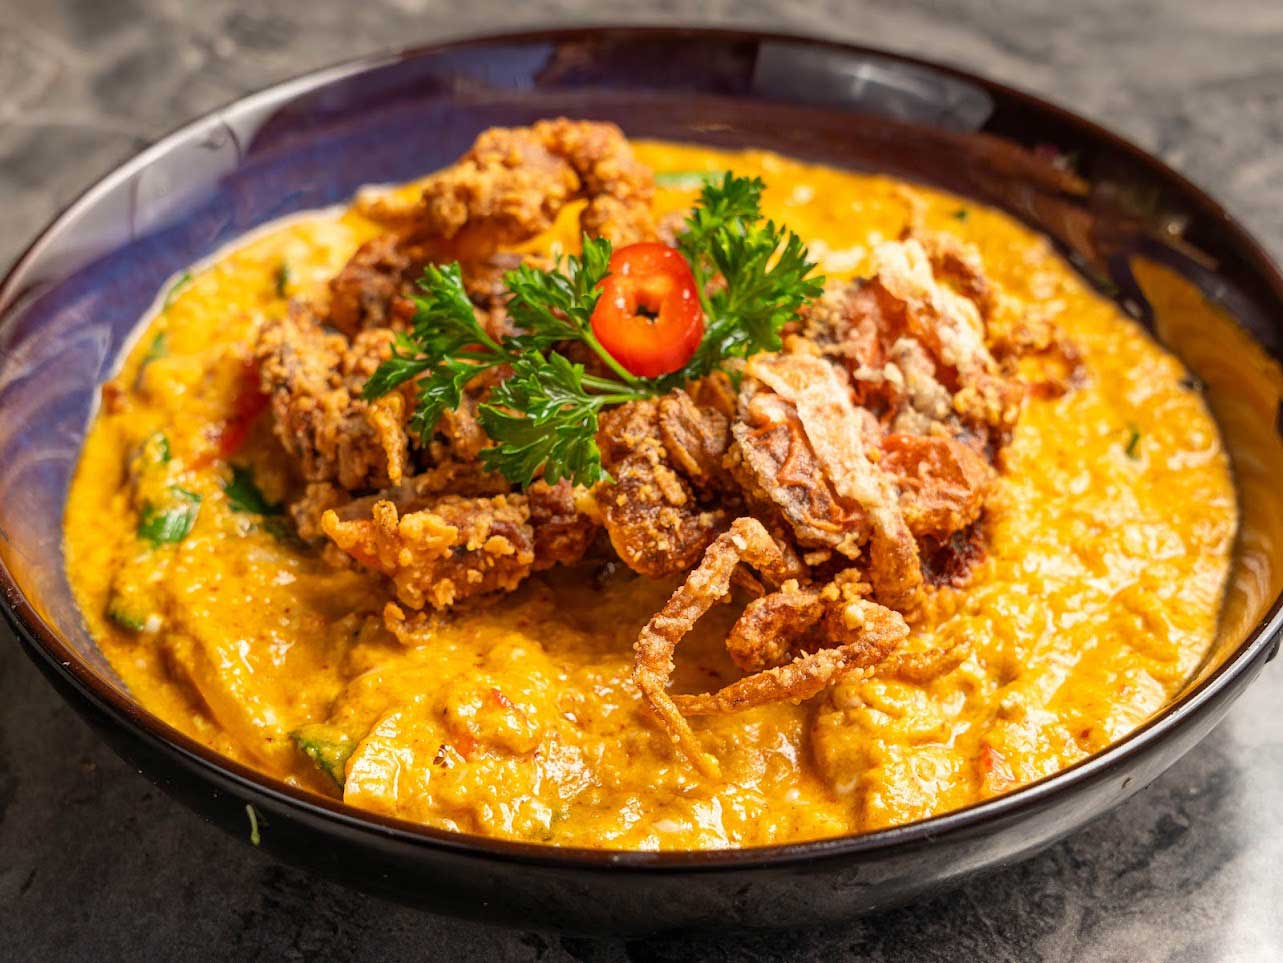 Soft shell crab curry